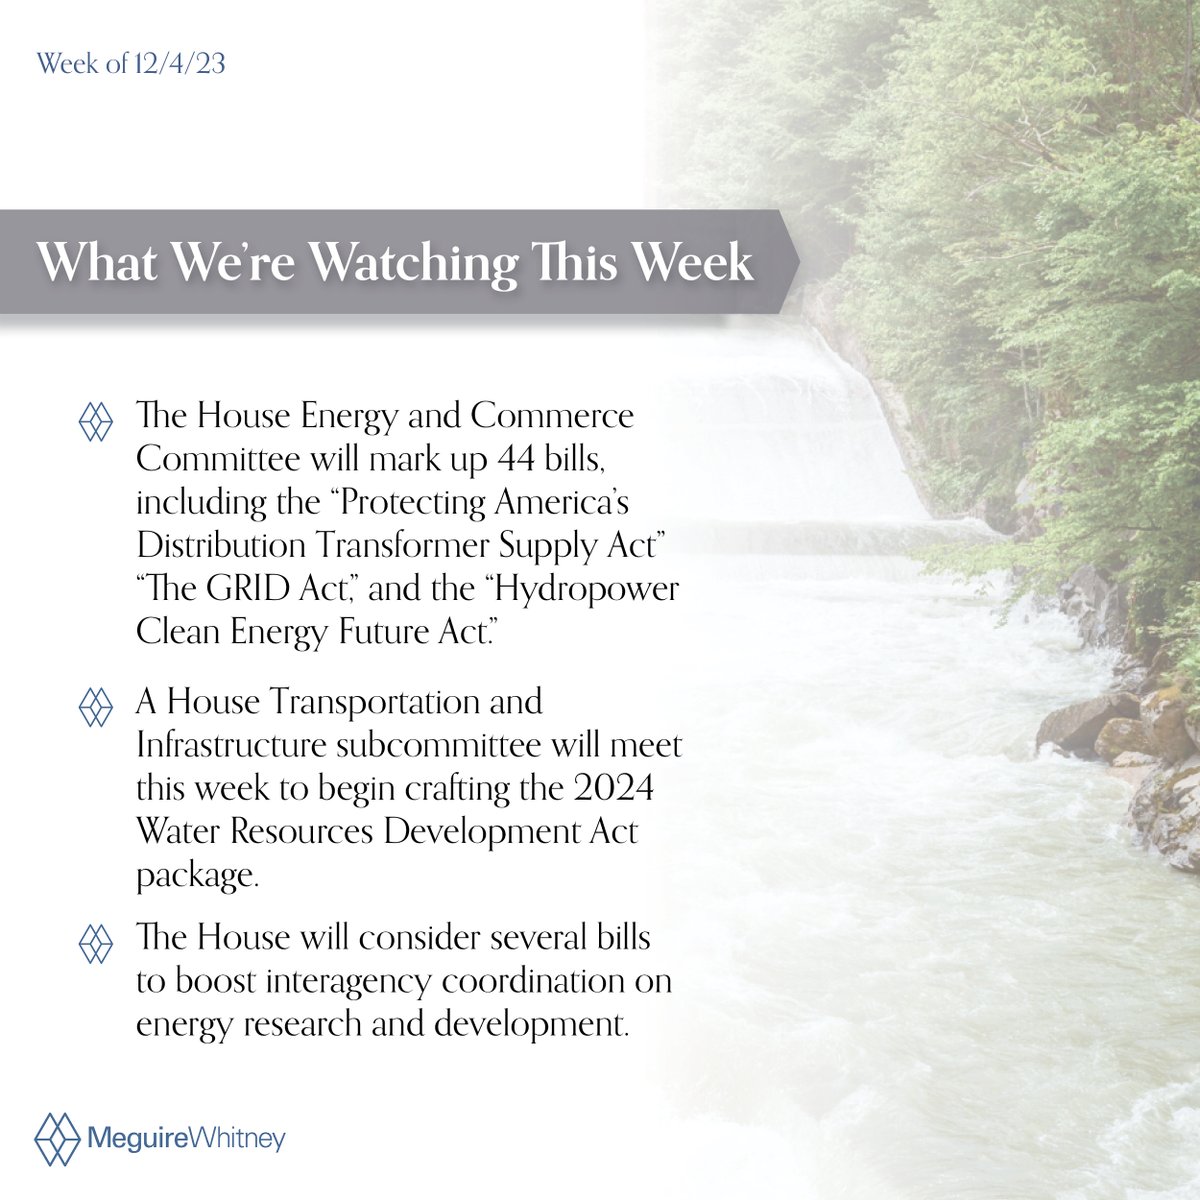 Lawmakers are operating without a year-end funding deadline for the first time in recent memory - here's what they're spending time on instead. If there's anything you're watching this week, let us know in the comments! #MeguireWhitney
#EnergyandCommerce #Congress